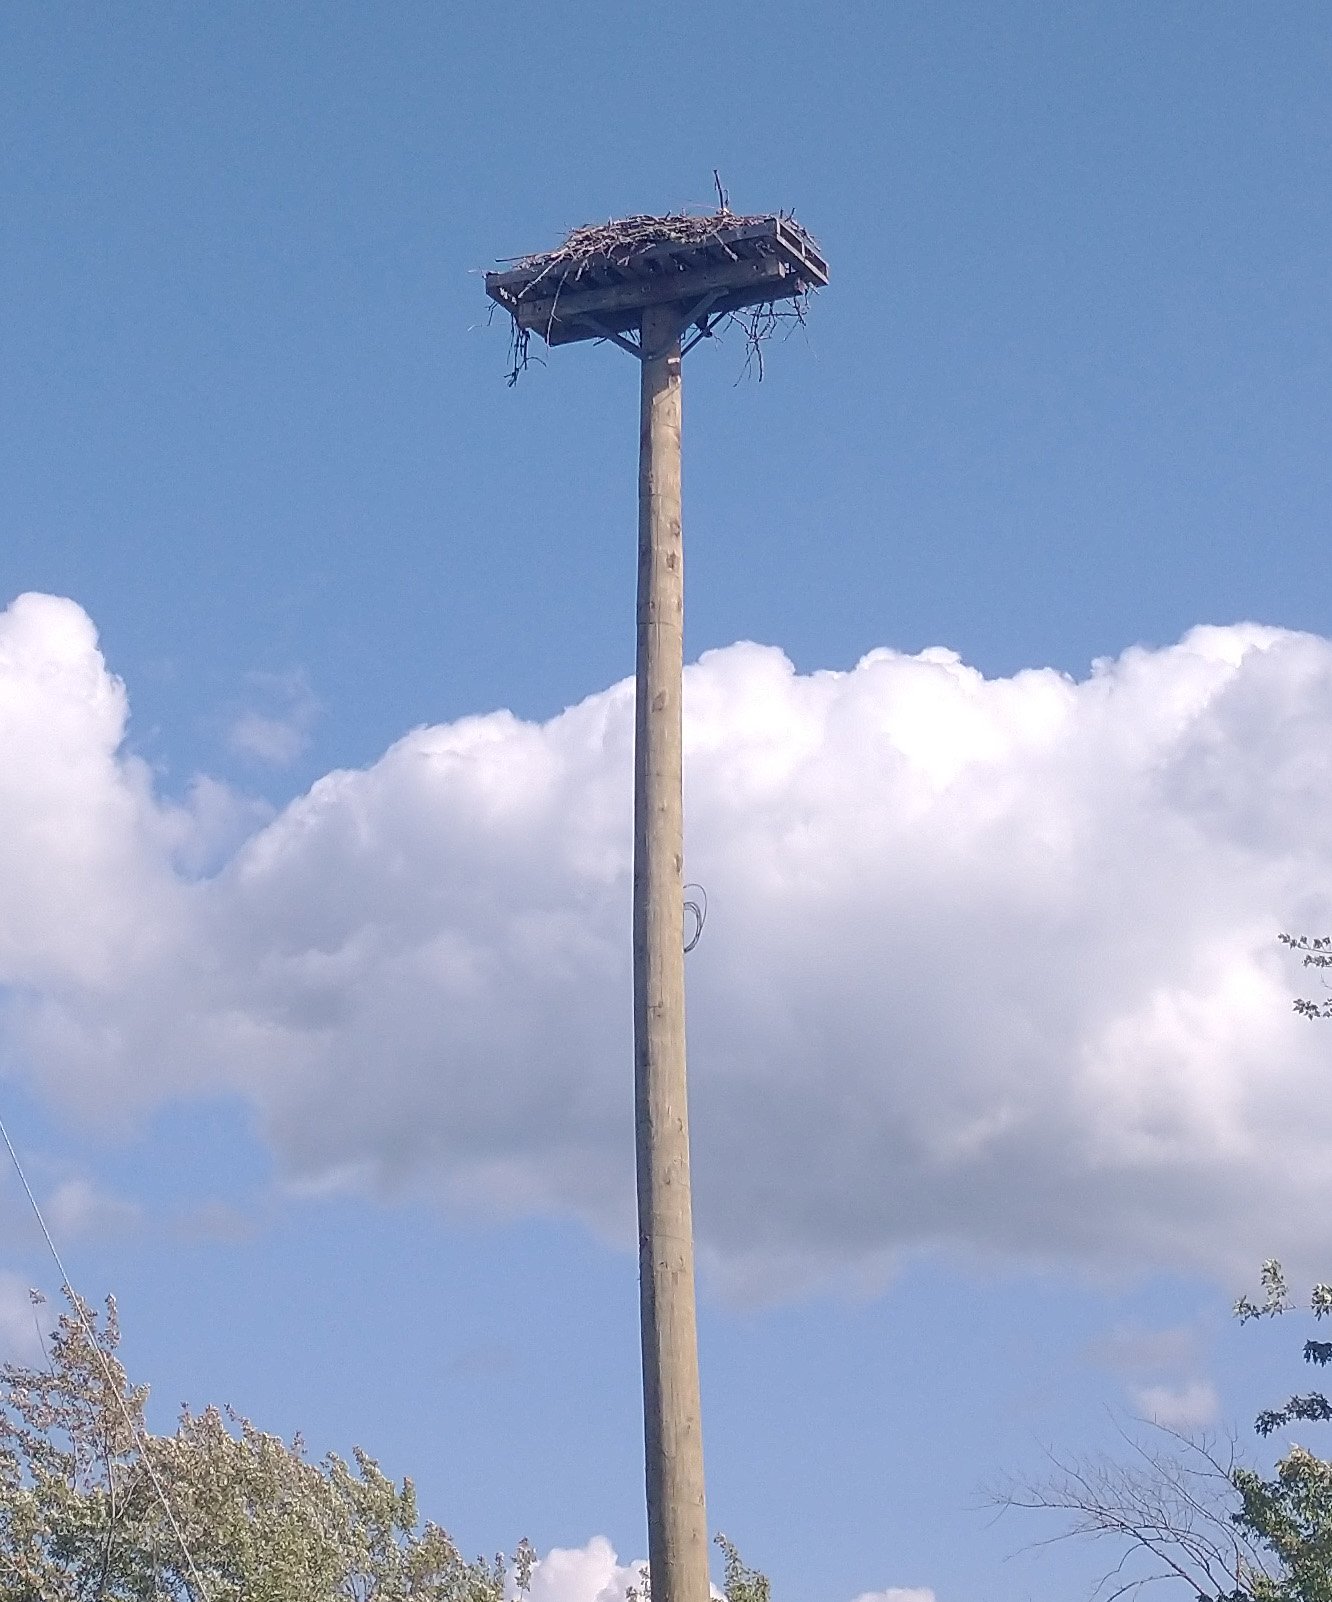 Been seeing a lot of these Osprey nesting platforms. They always fly off when I stop though.